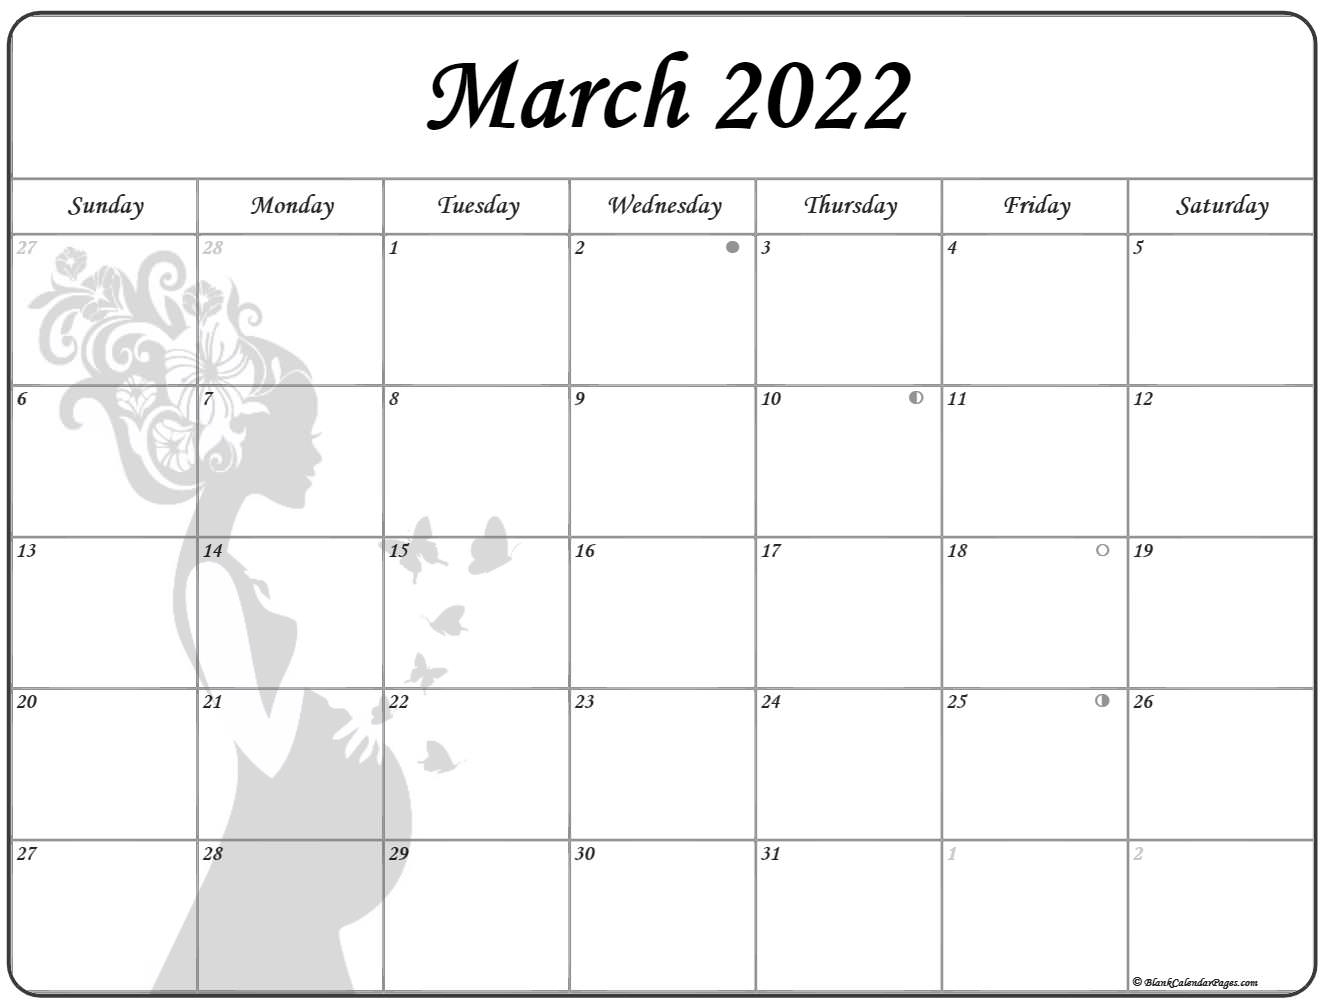 Collection Of March 2022 Photo Calendars With Image Filters.